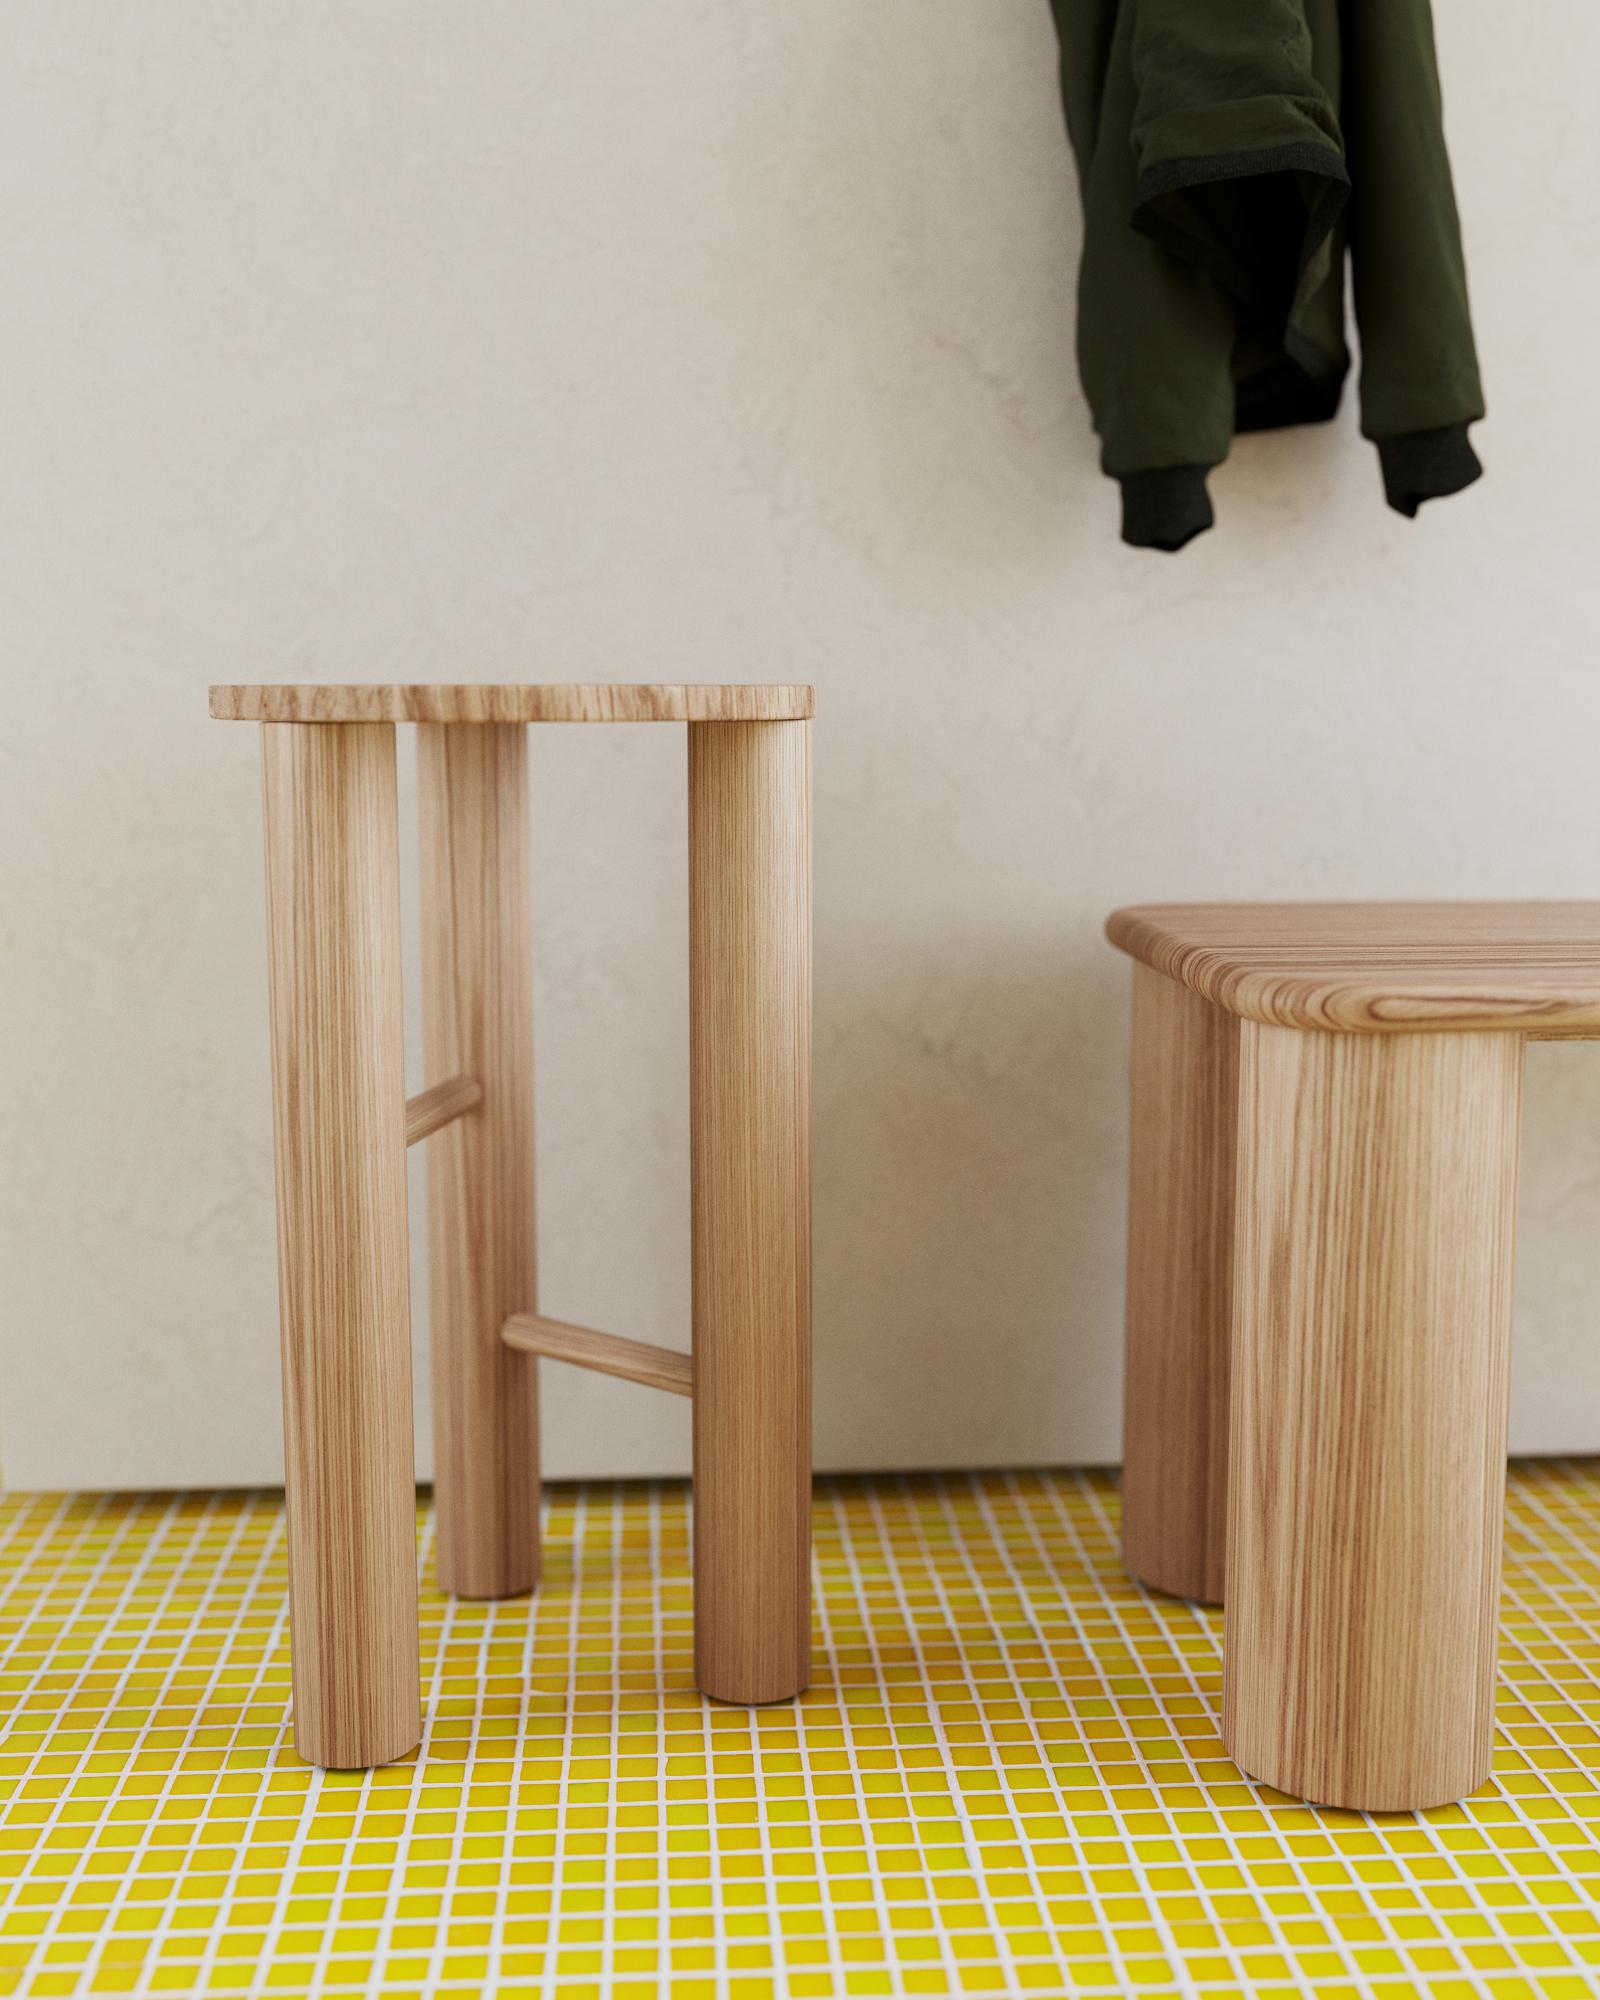 The LAD stool is crafted entirely from solid red oak covered with a clear matte lacquer. This unique stool captures the essence of local craftsmanship in Quebec. LAD is a versatile masterpiece with three legs, available in two heights - 2164 inches